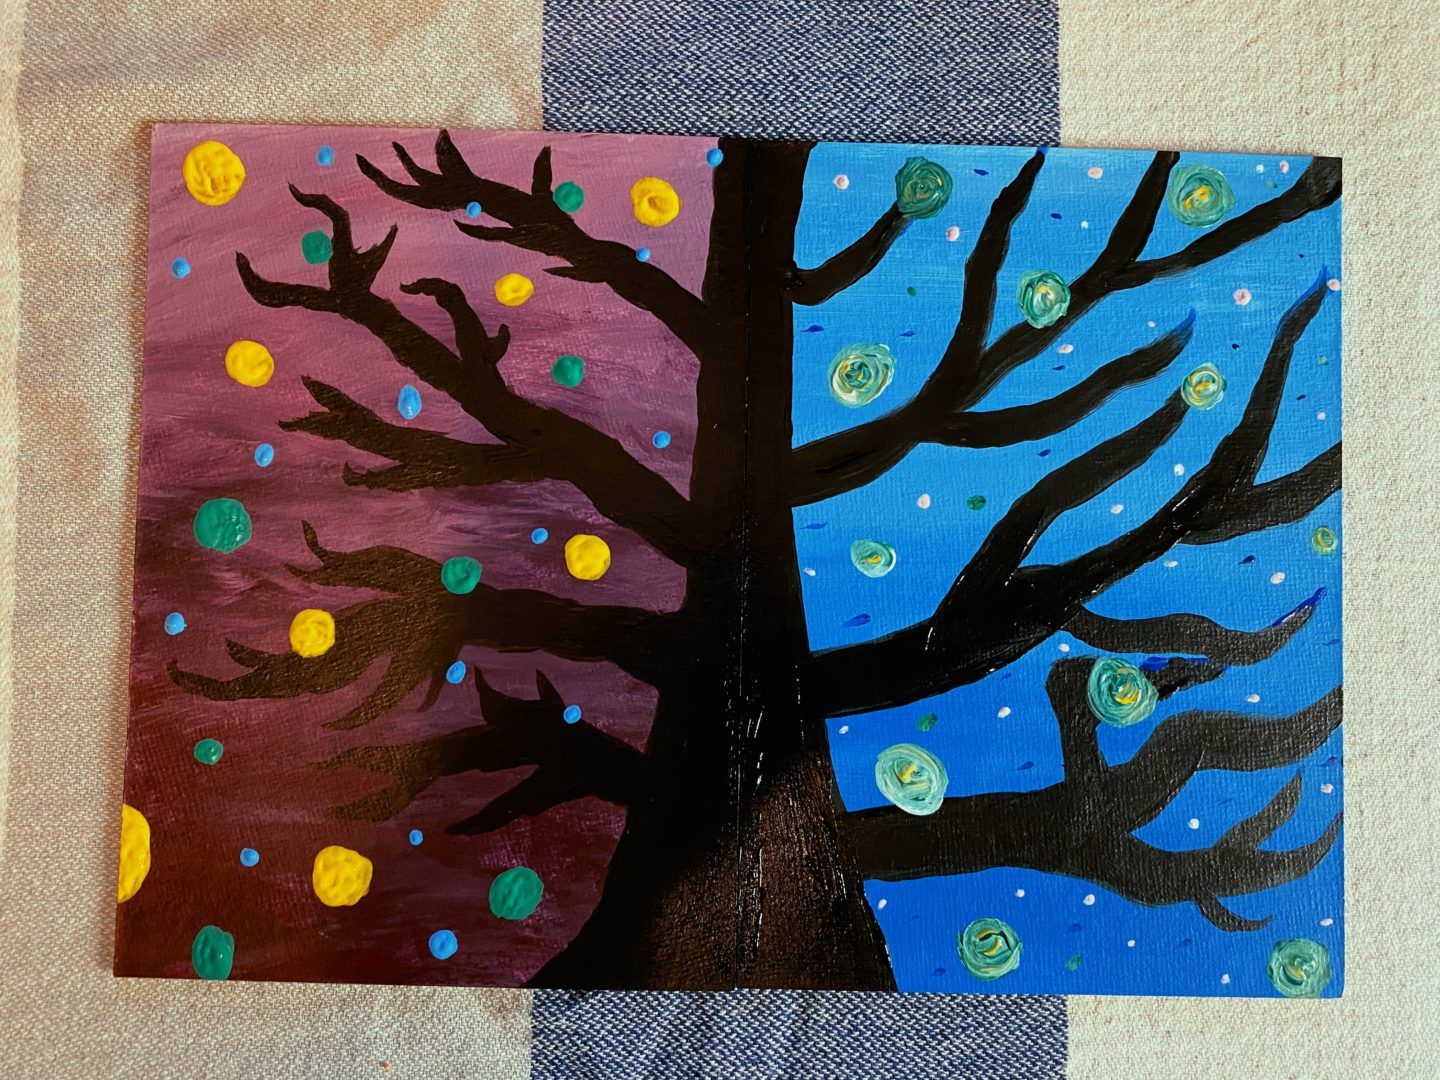 A Date Night with Painting and the DateBox Club